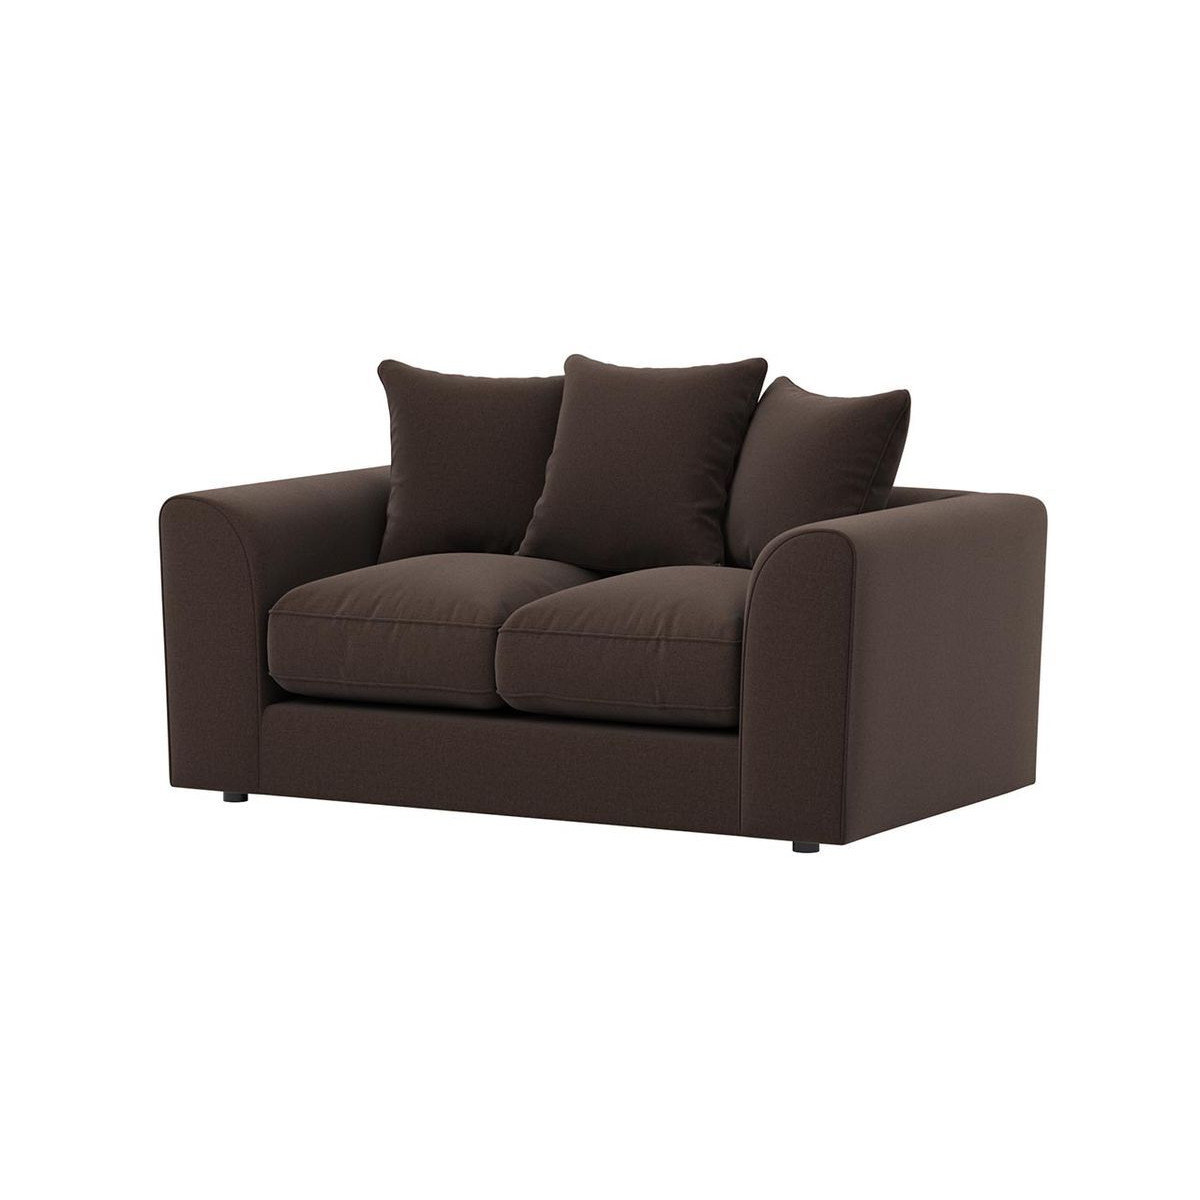 Dillon 2 Seater Sofa Bed, brown - image 1